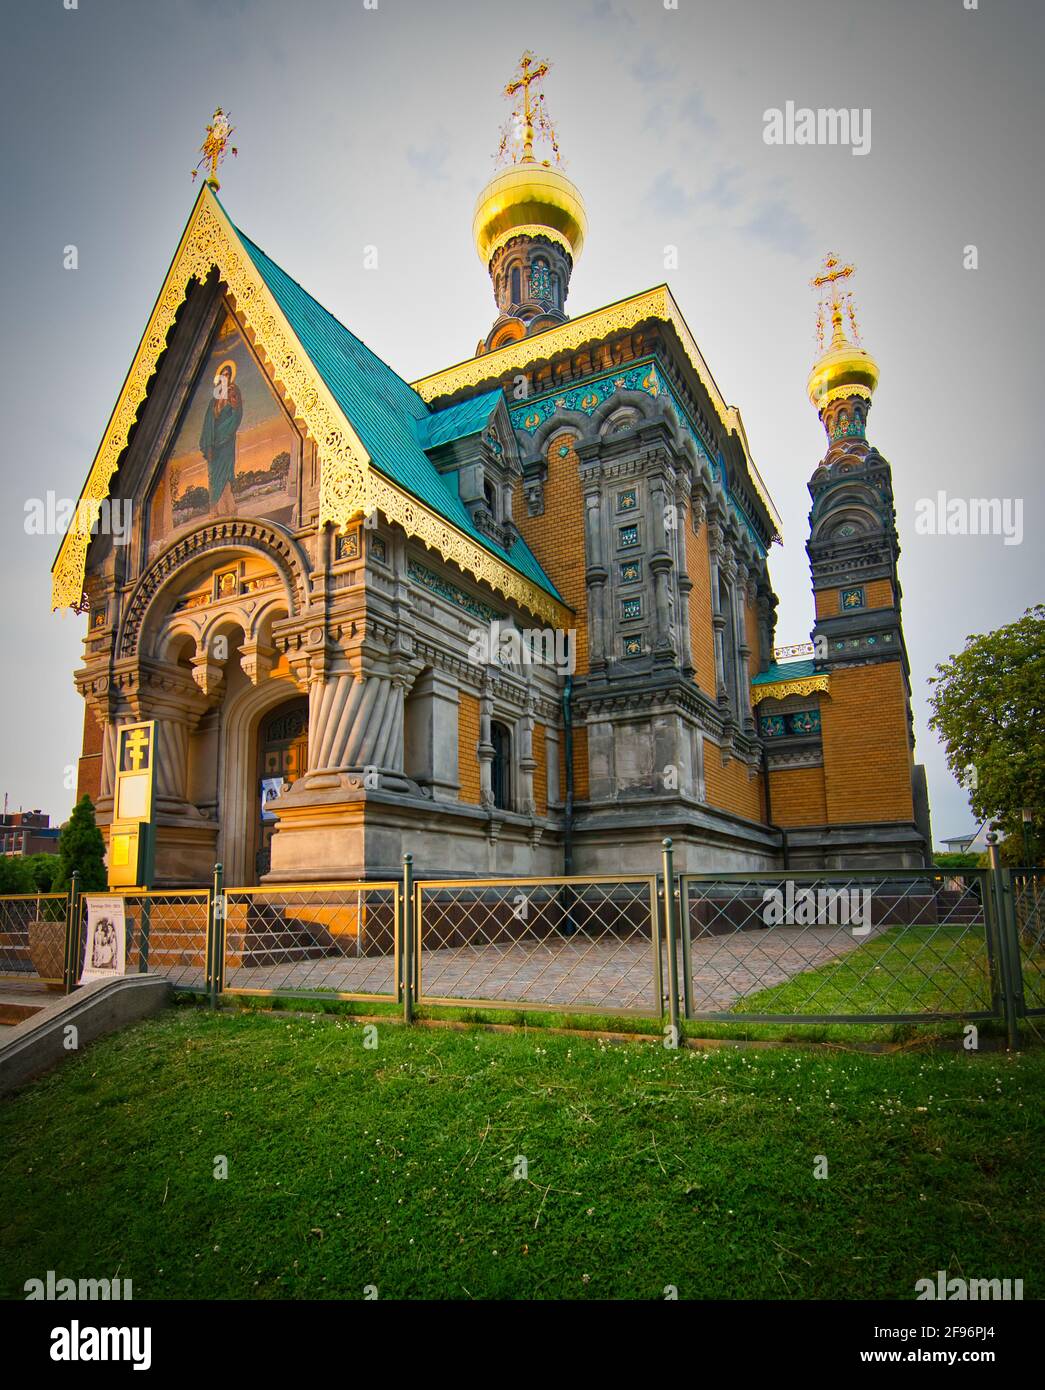 St. Maria Magdalena Russian Orthodox Church of Darmstadt Germany. Russische Orthodoxe Kirche der hl. Maria Magdalena Darmstadt. Places to visit. Stock Photo